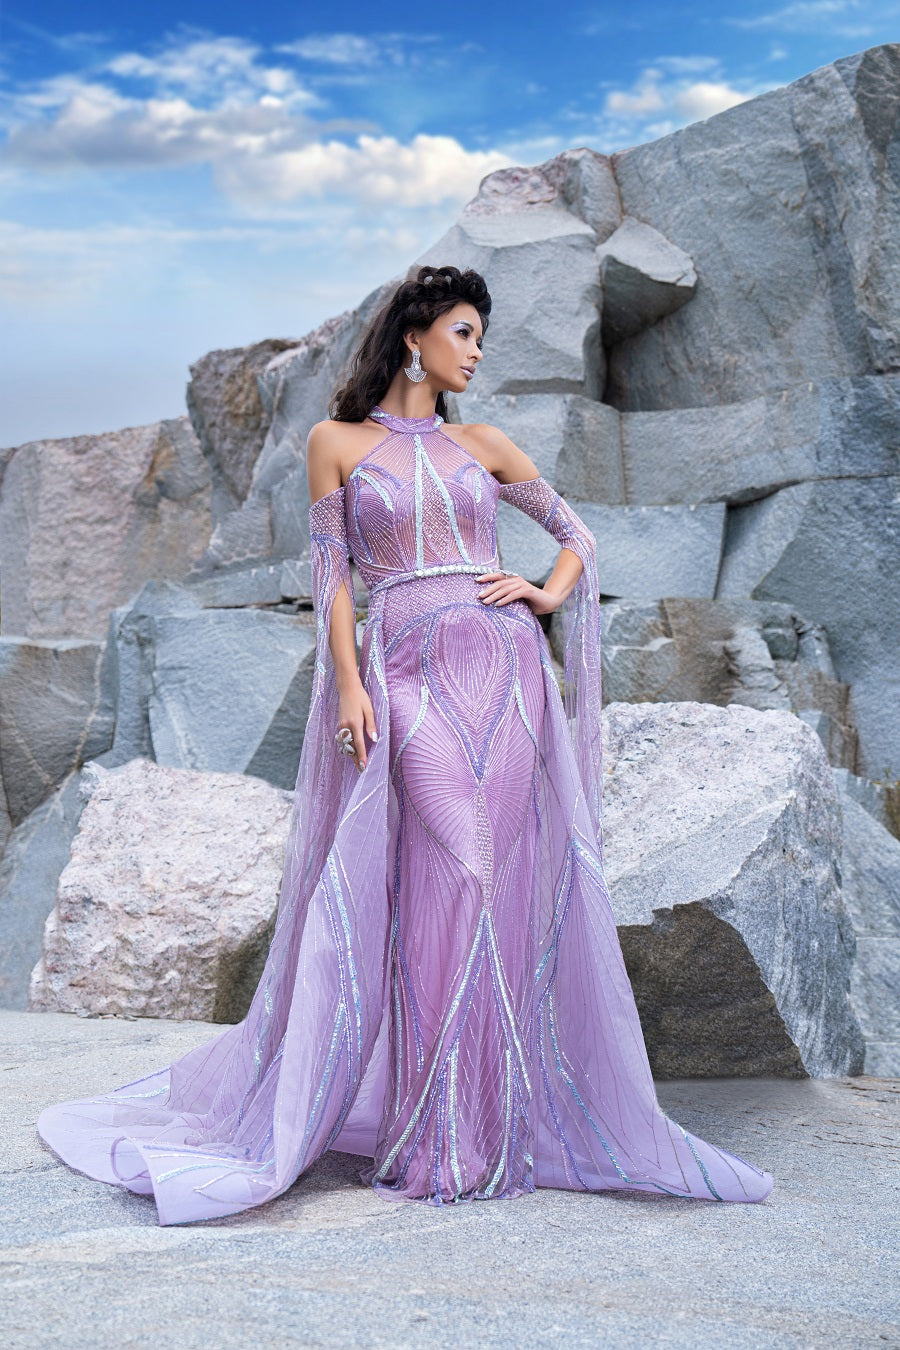 Aurora Chrystalis Gown - Handcrafted Designer Dress for Special Occasions